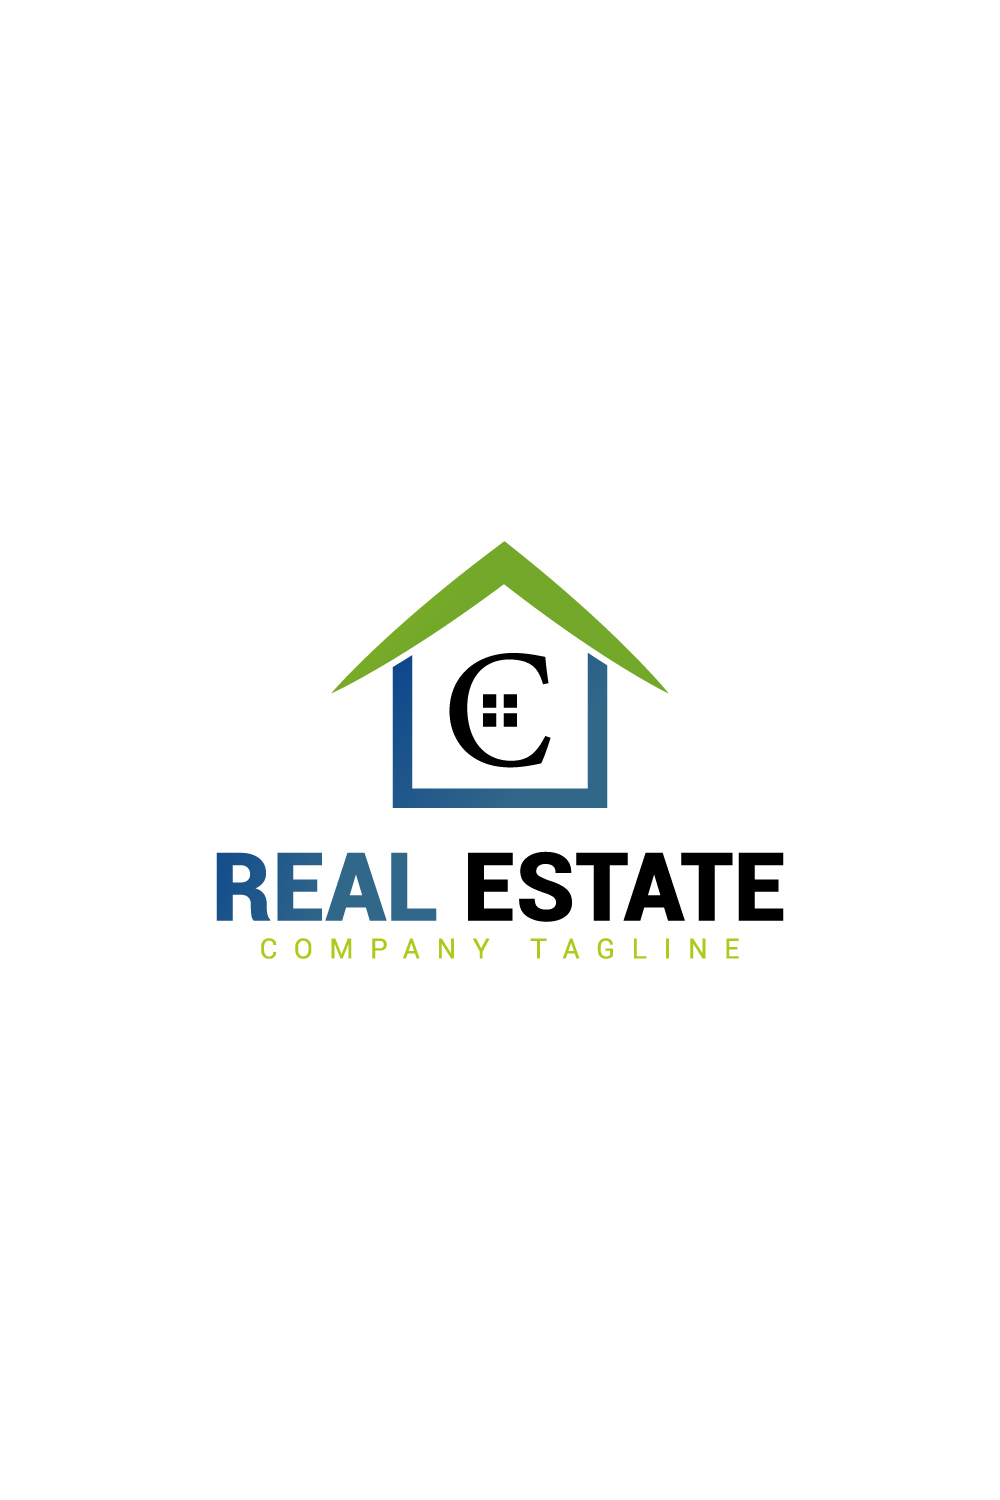 Real estate logo with green, dark blue color and C letter pinterest preview image.